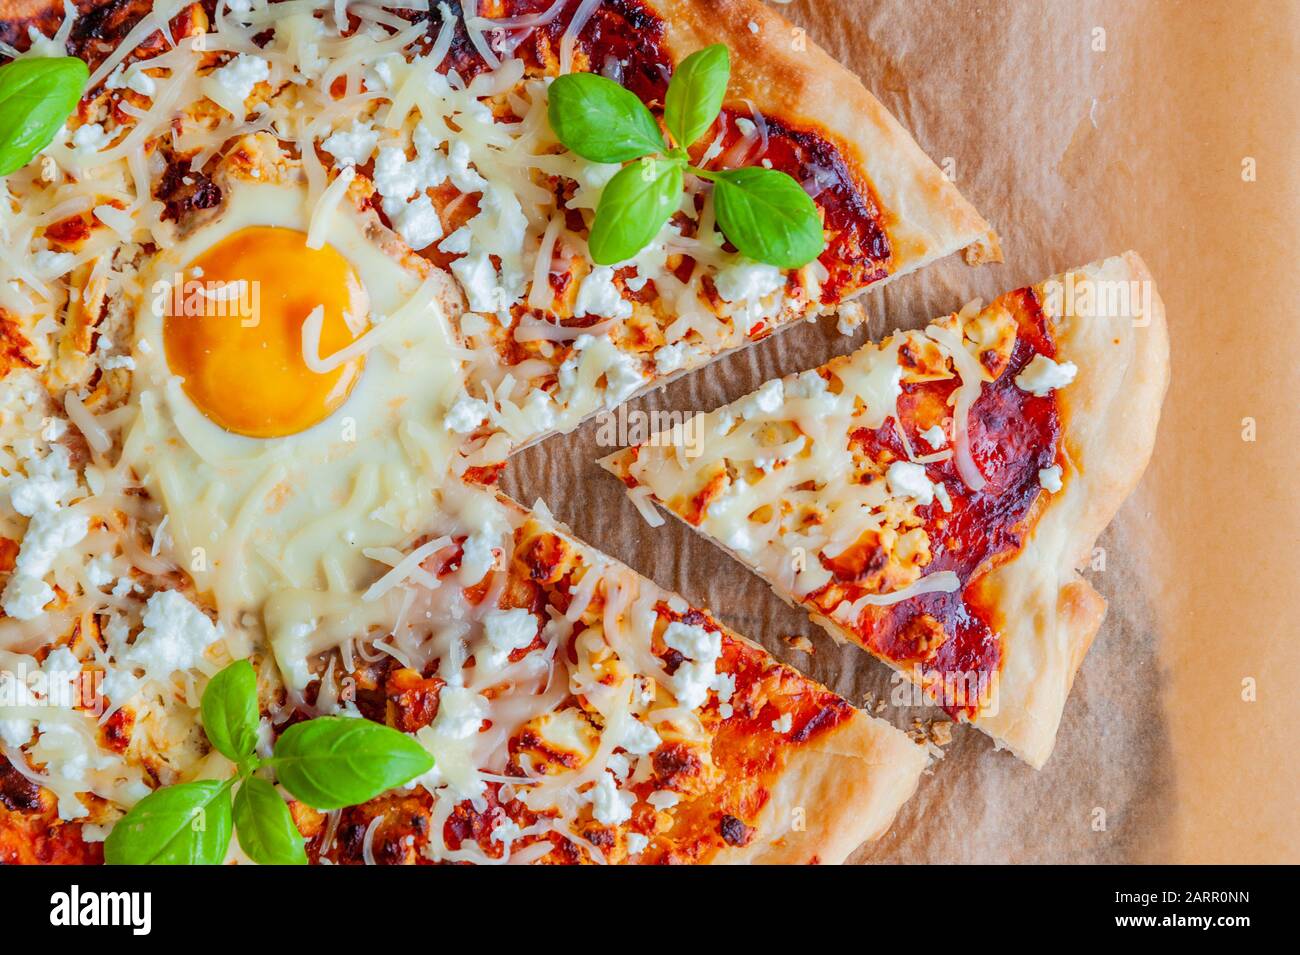 Shot of a pizza with egg, cheese and herbs. Rustic scene and dramatic light. Stock Photo